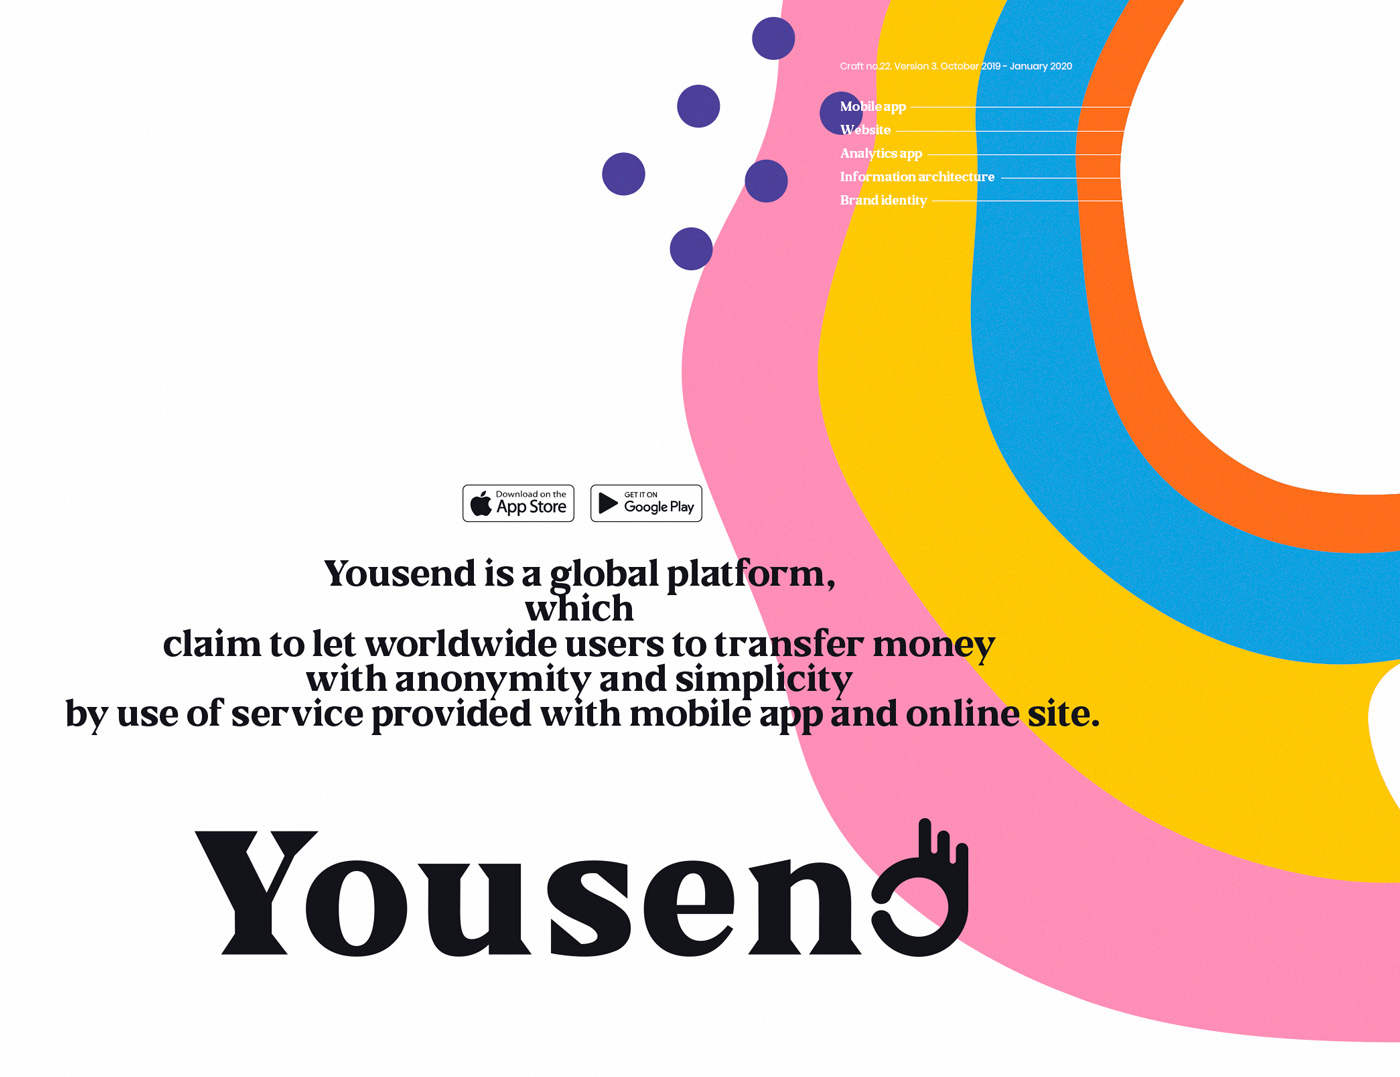 Yousend - money transfer app. More anonymity, less hassle way to transfer money.